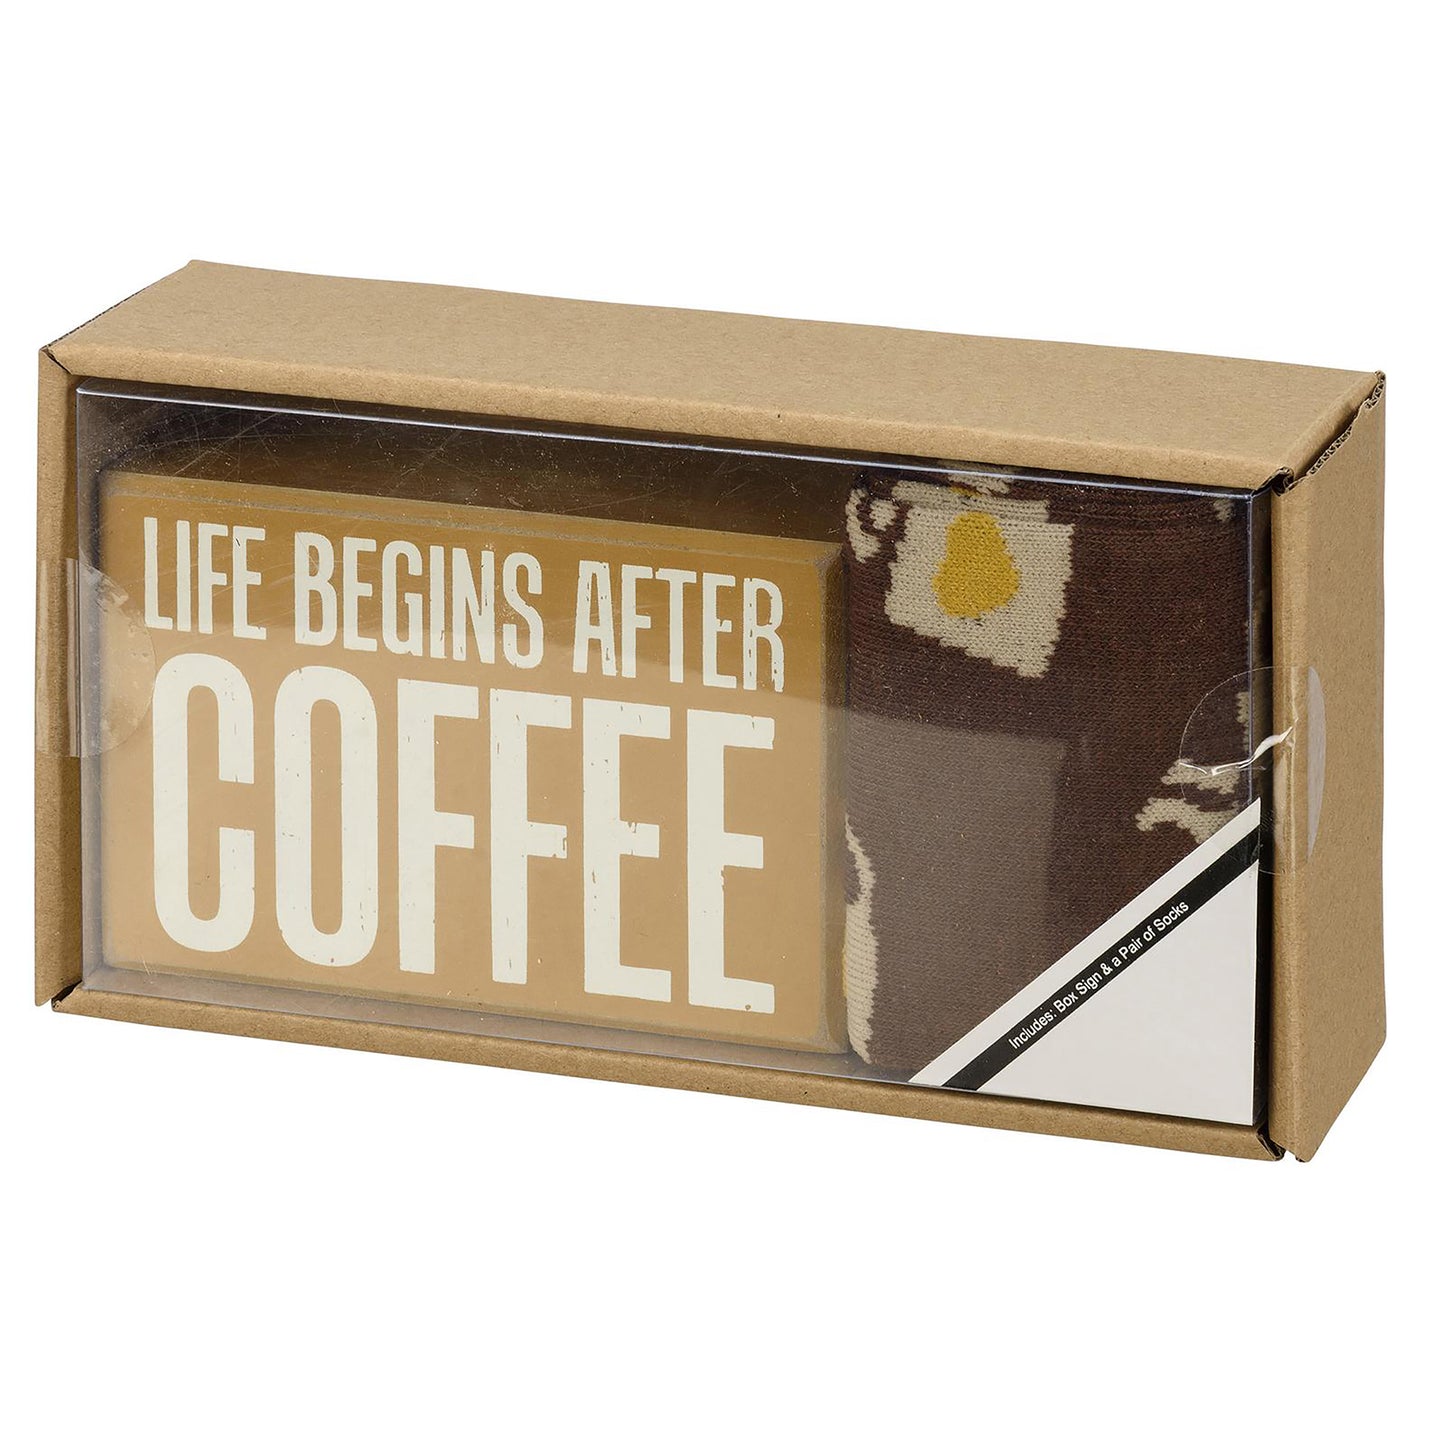 After Coffee Box Sign And Sock Set